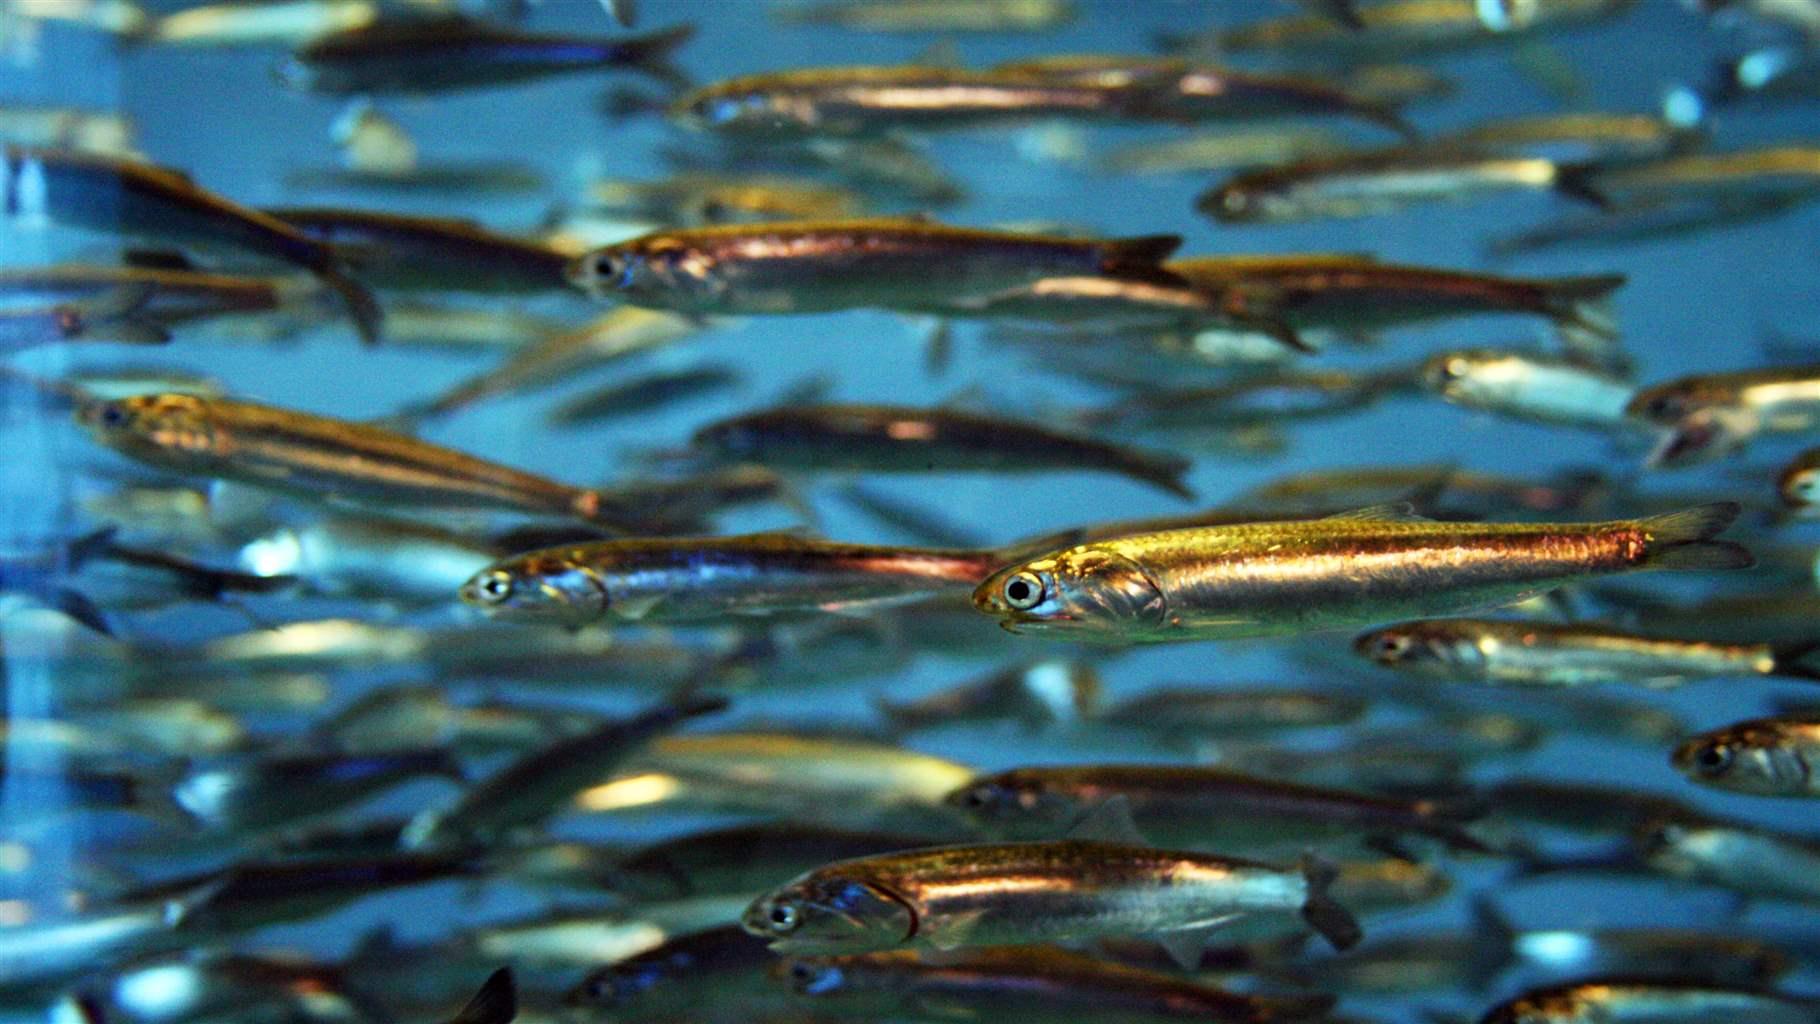 A school of sardines shimmers as it moves through the water